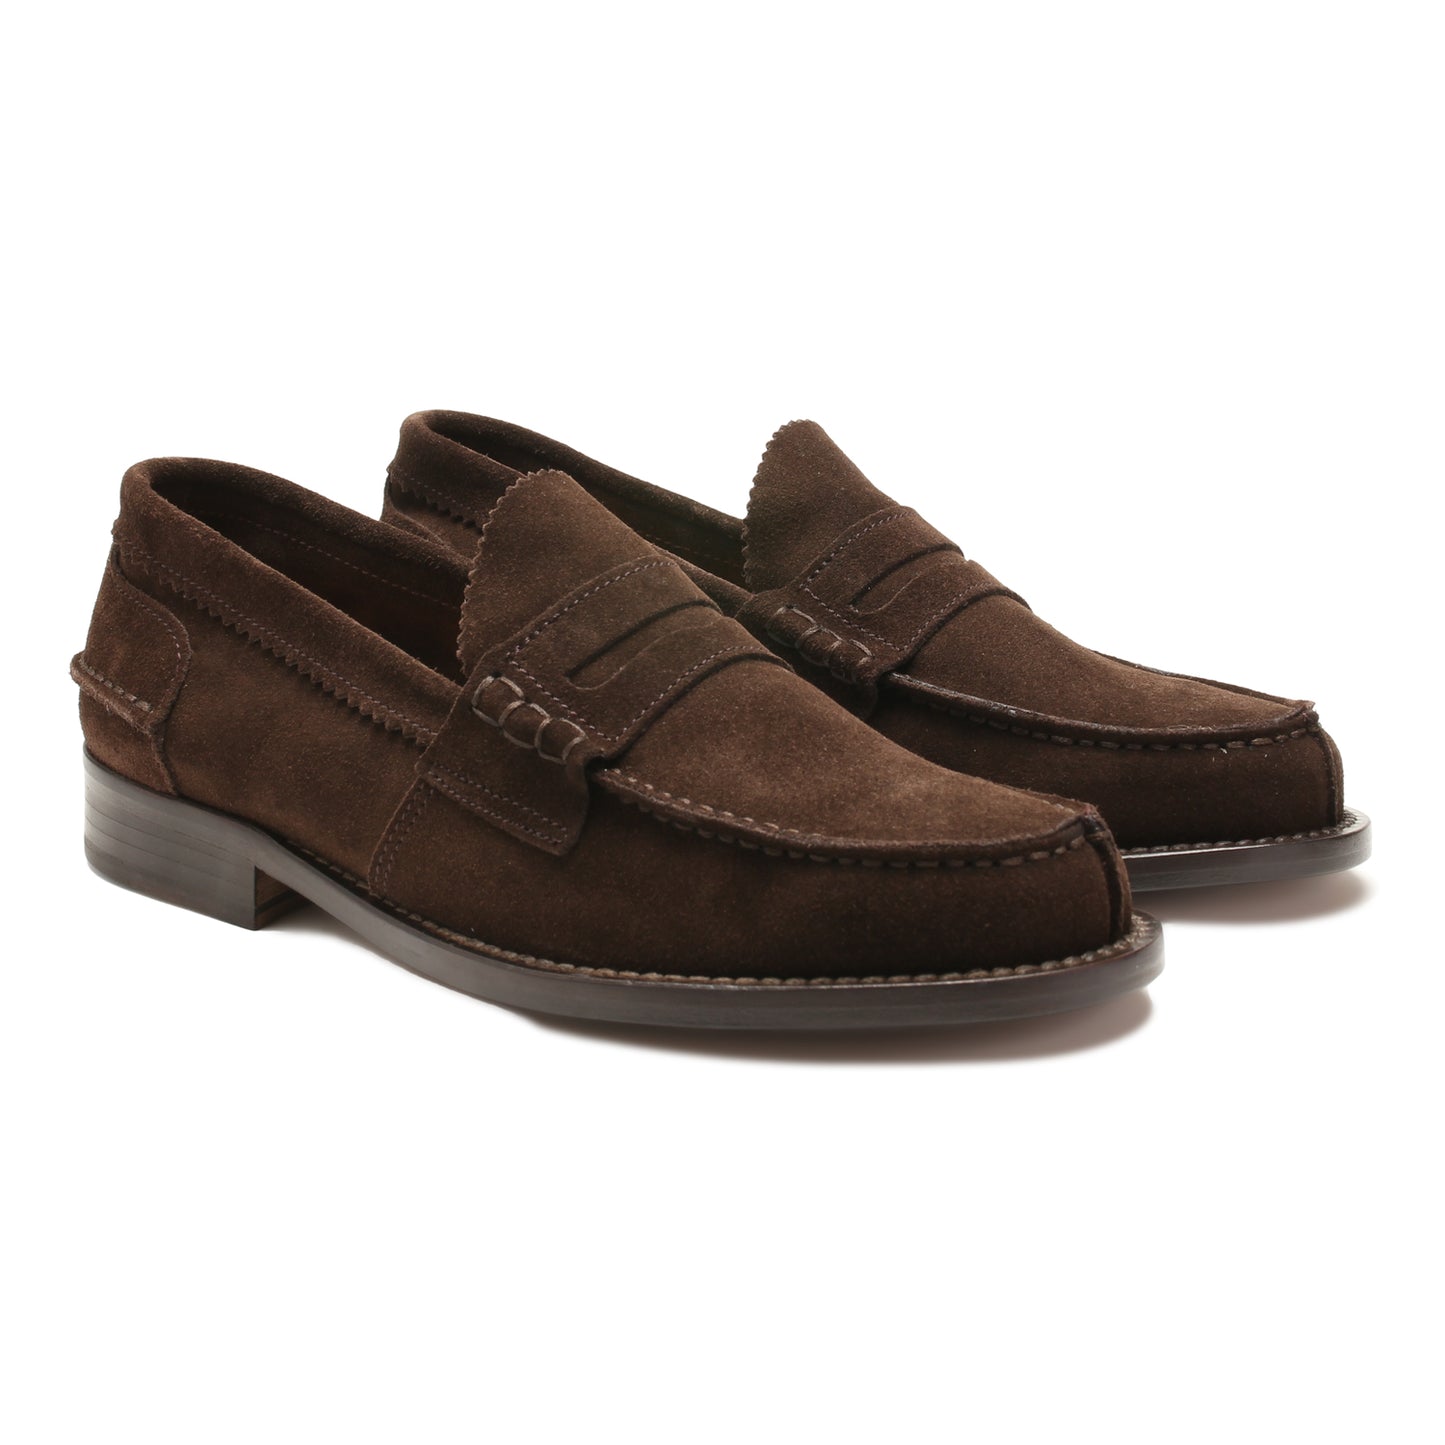 Saxone of Scotland Elegant Mens Suede Leather Loafers